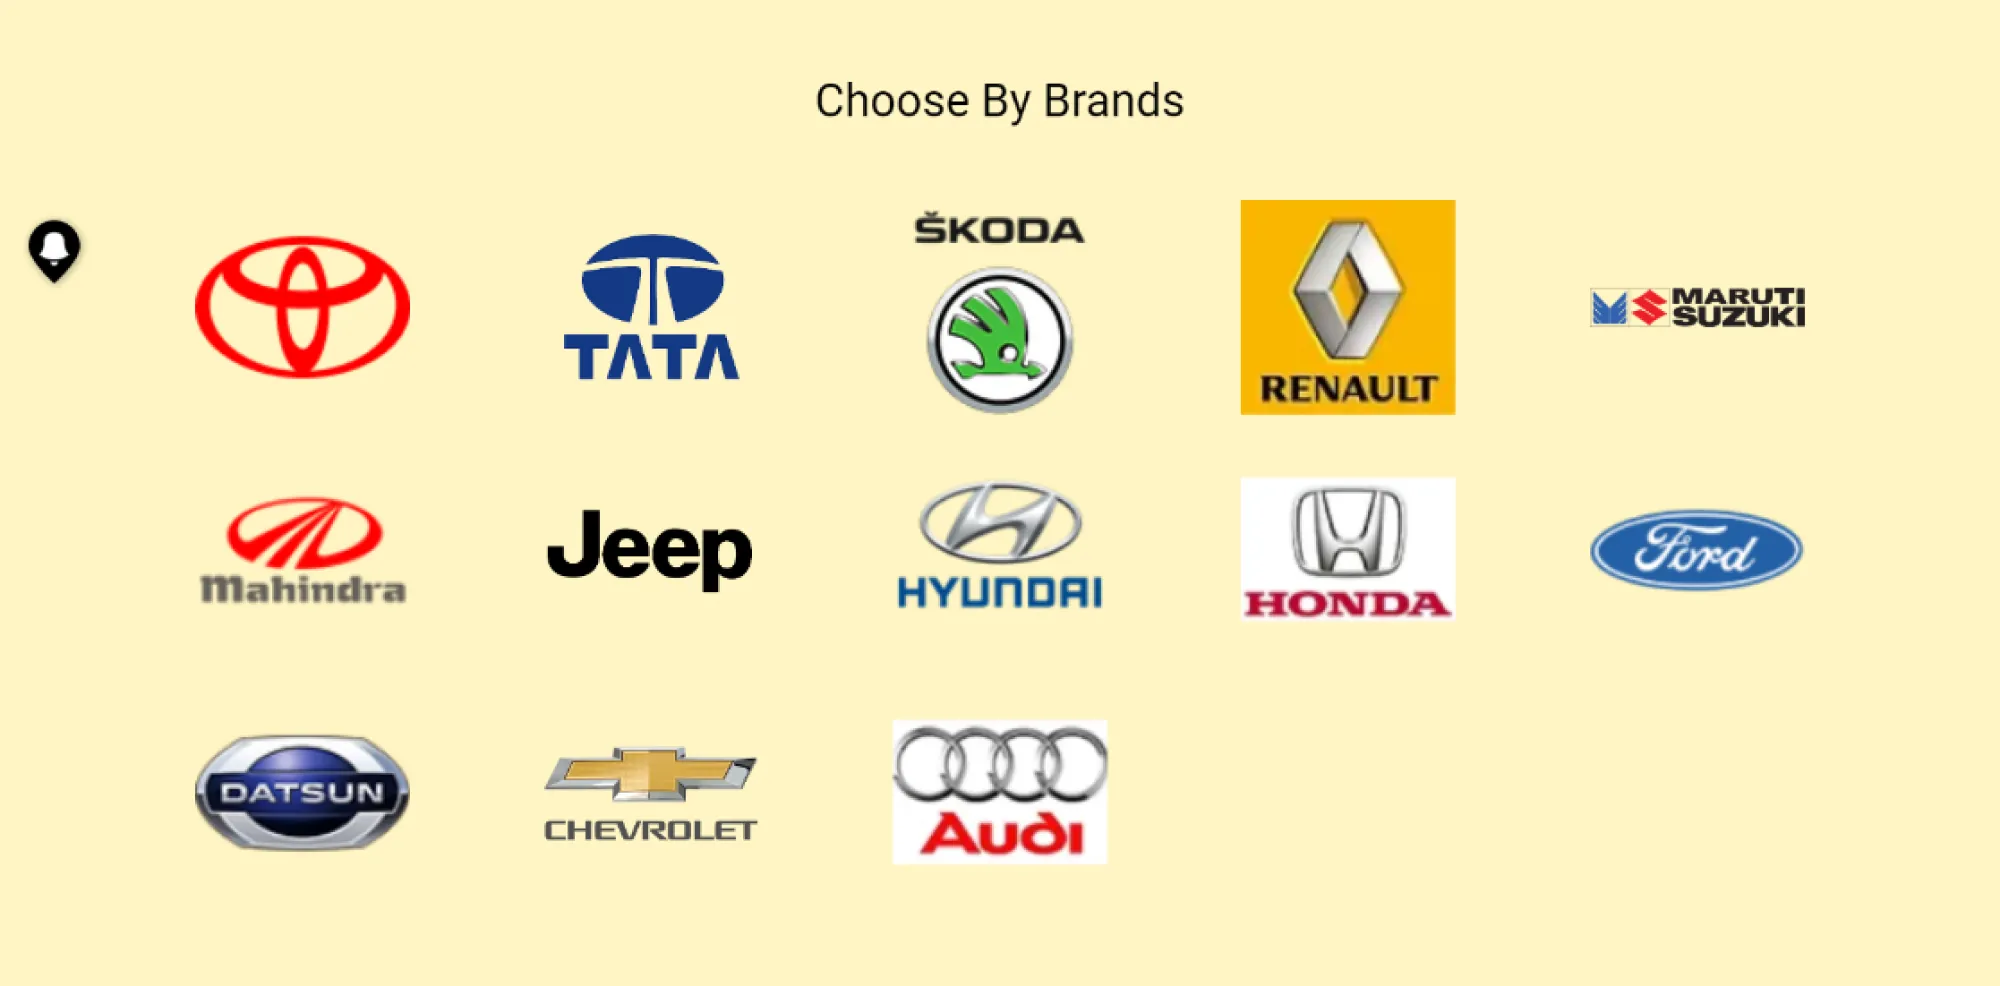 Choose By Brands Section